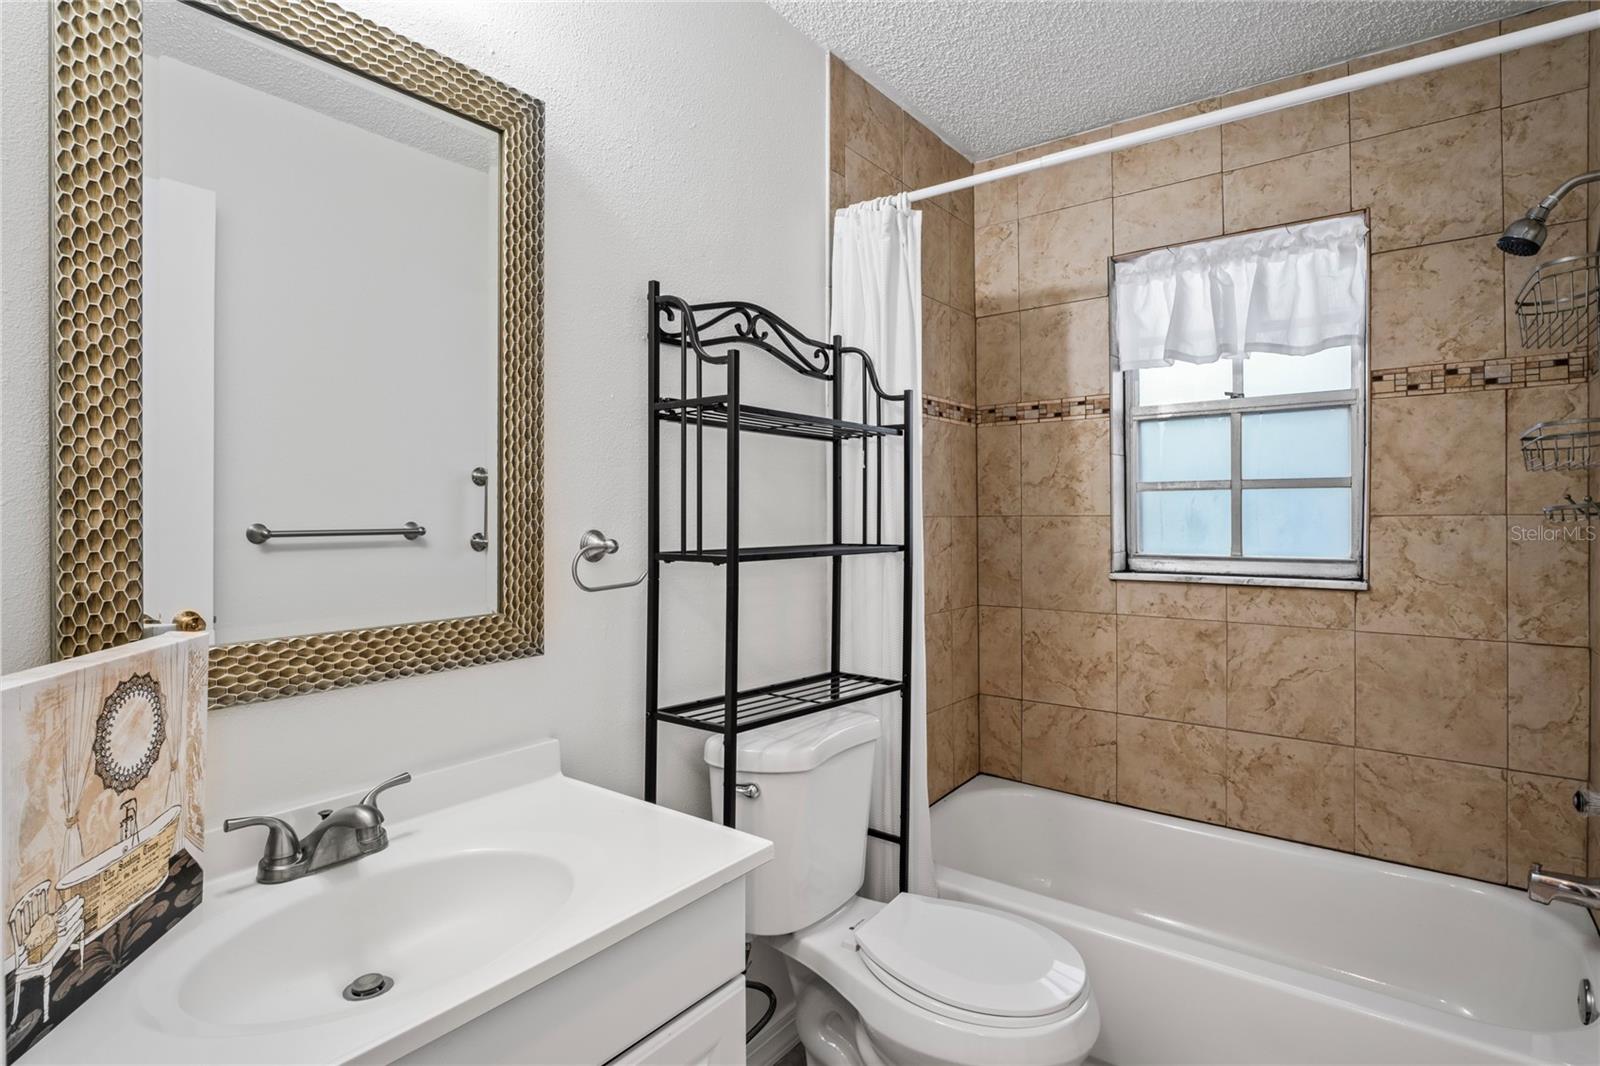 Guest bedroom offers a bathtub and shower, single vanity and a commode. The window is nice for ventilation and light.